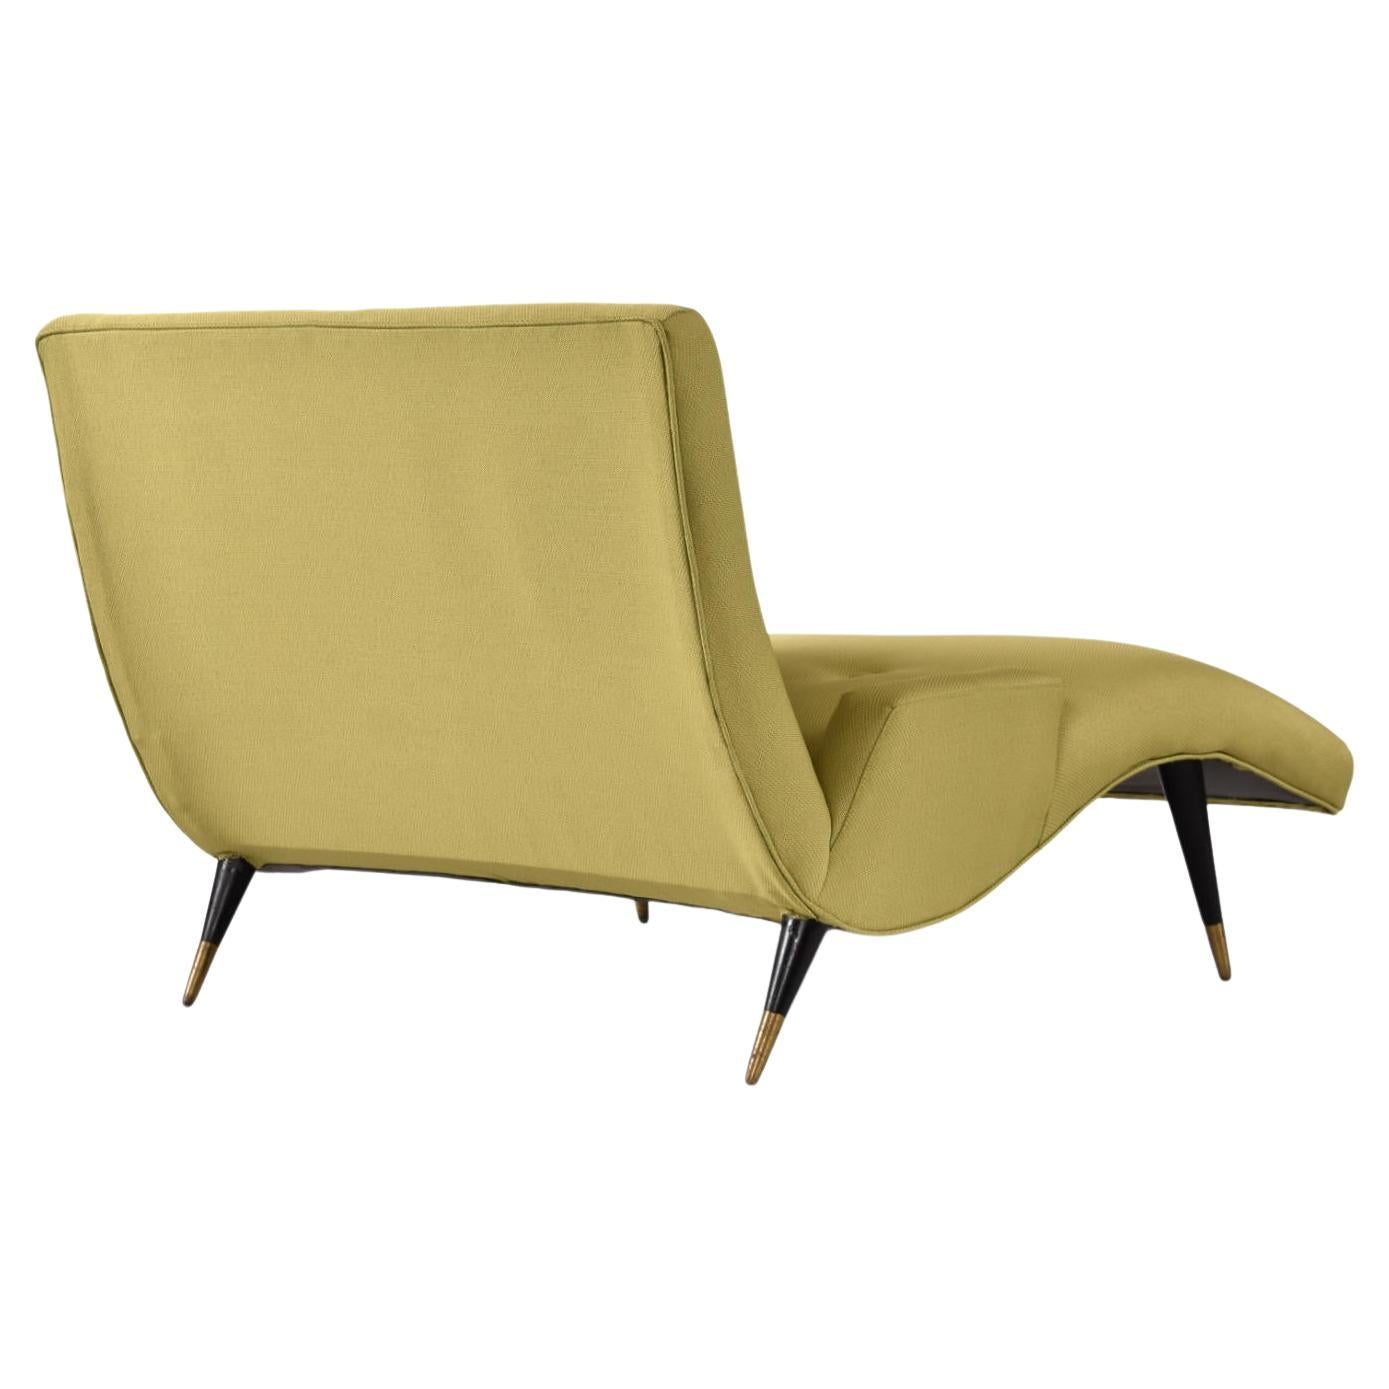 Restored Mid-Century Modern Adrian Pearsall Style Wave Chaise Lounge